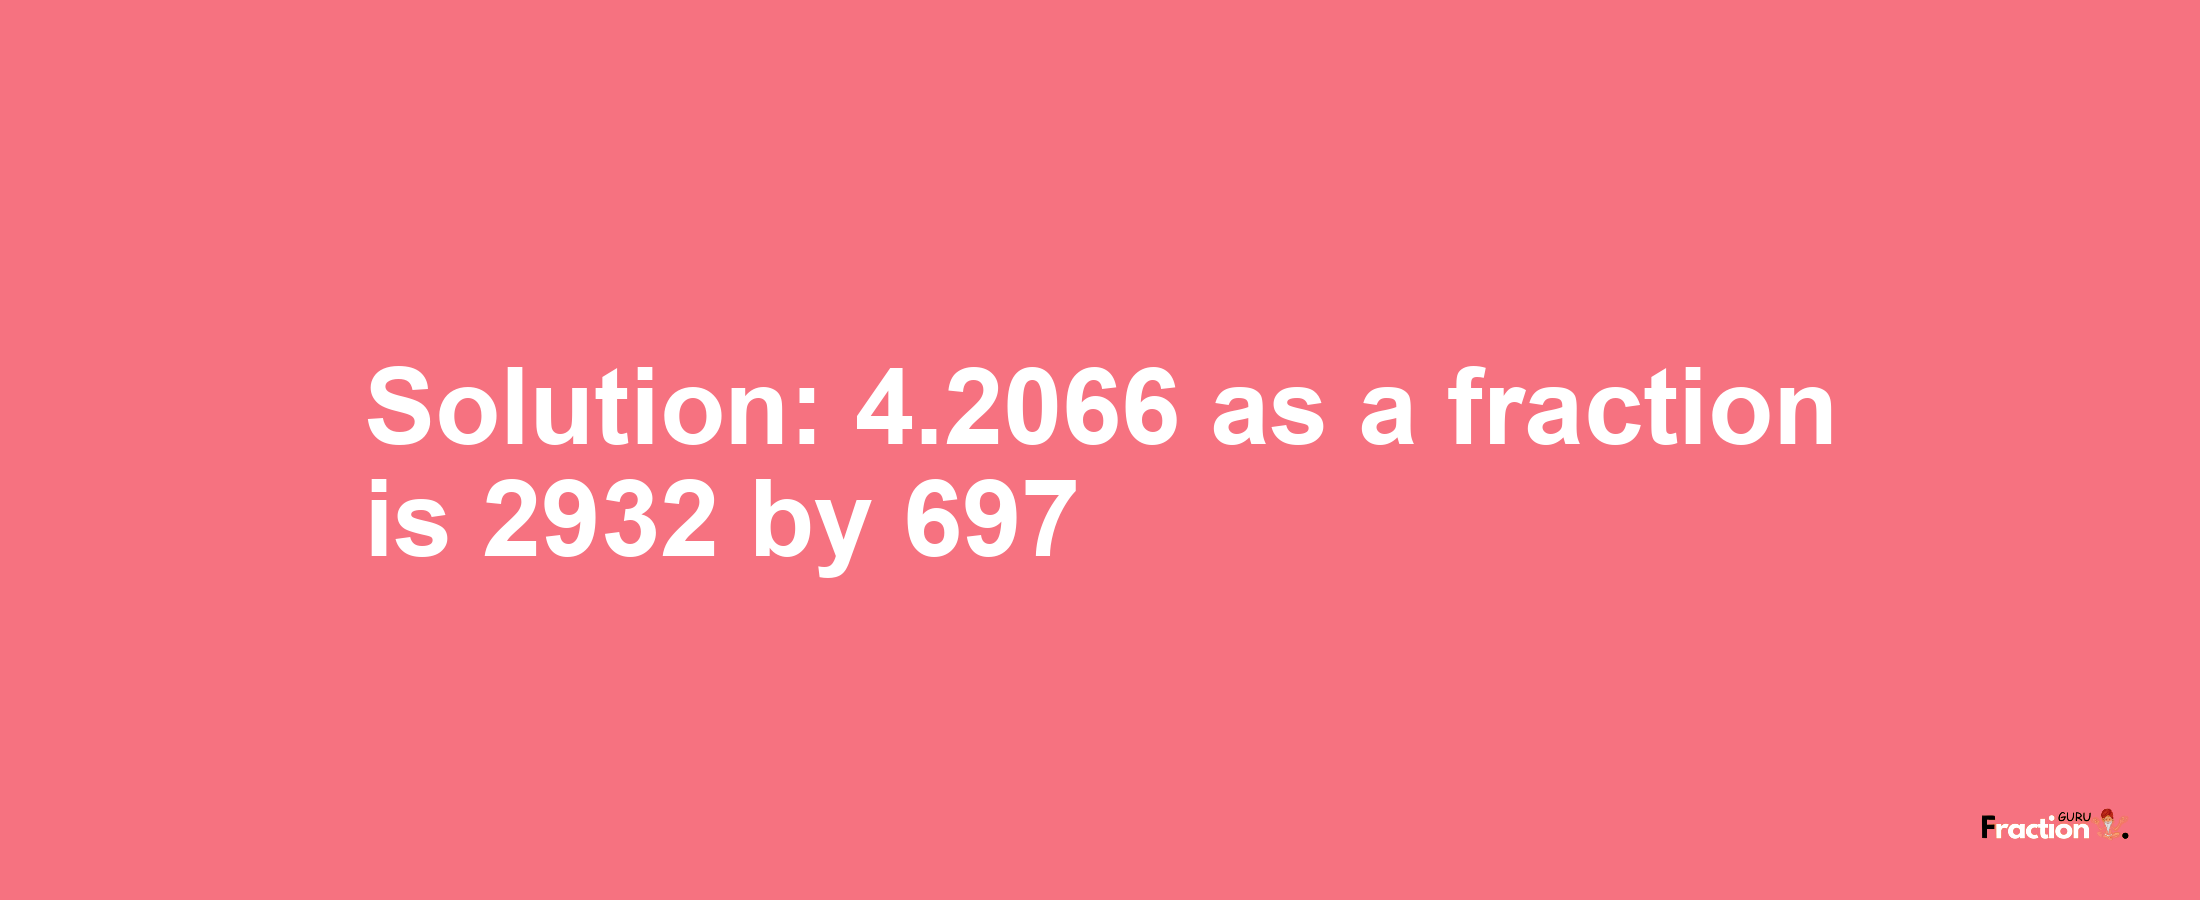 Solution:4.2066 as a fraction is 2932/697